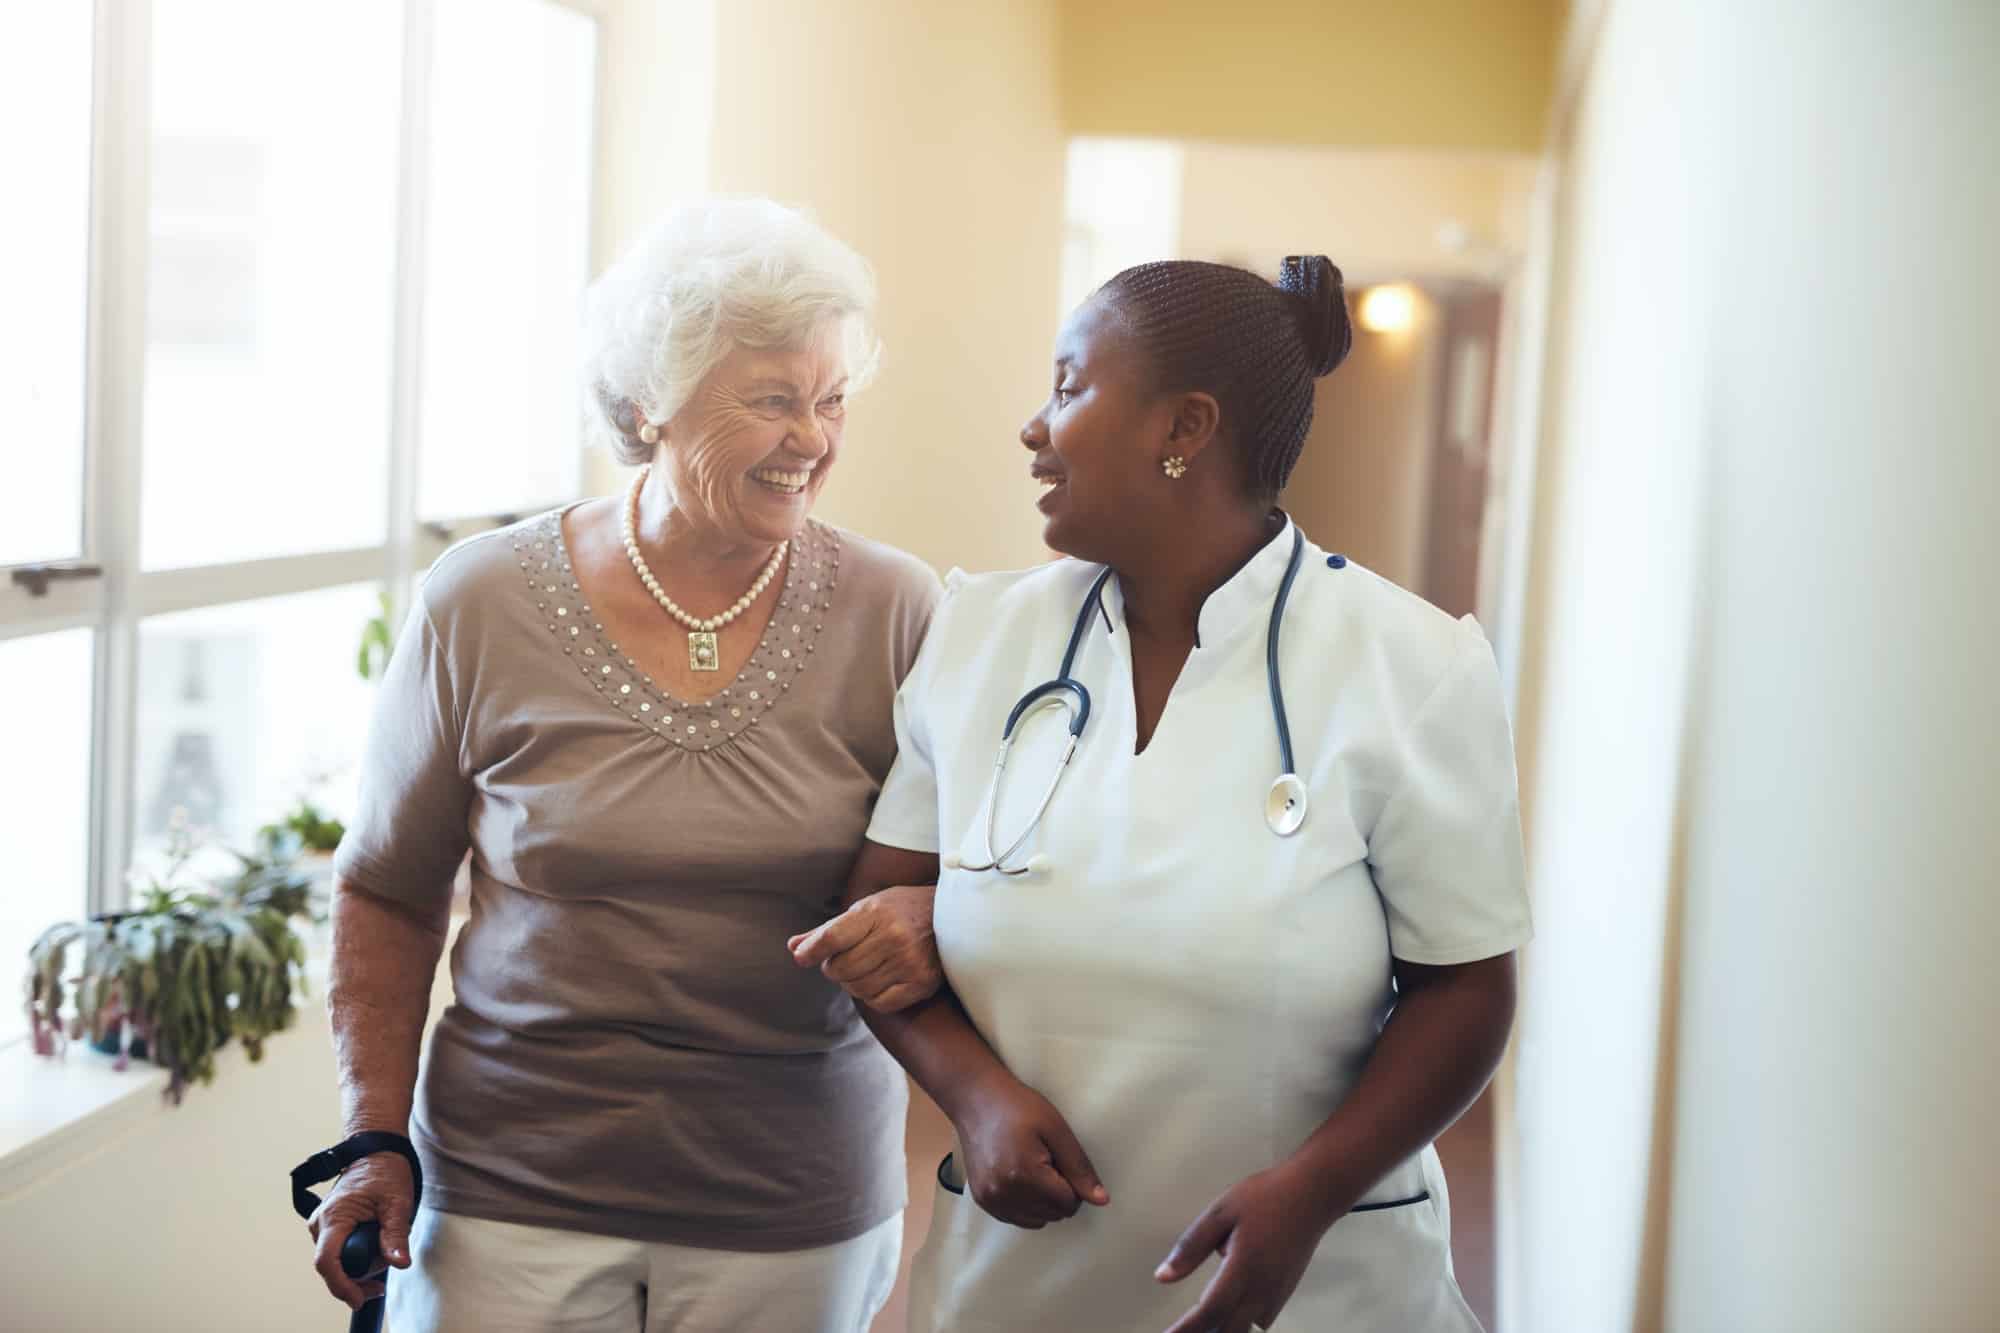 On average, how many hours per day do staff members spend with each resident?